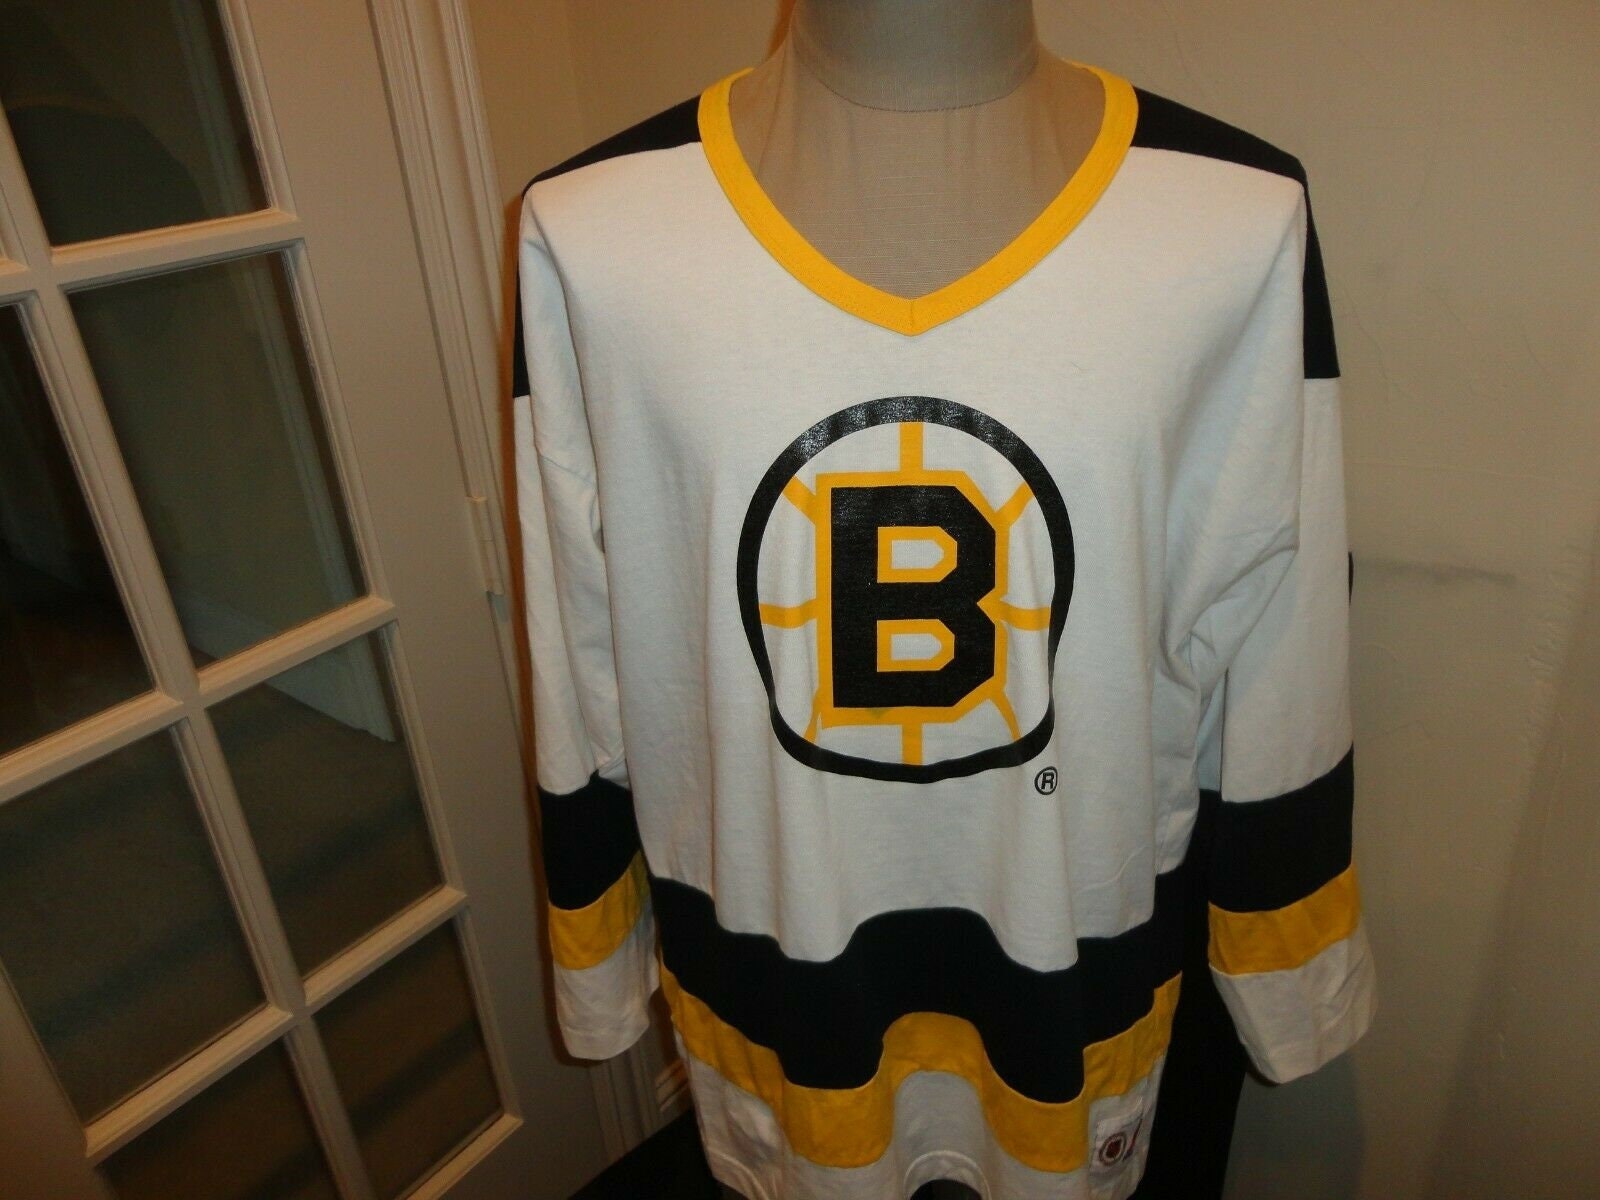 Mail Call: Old school Bruins Jersey came in today! : r/BostonBruins